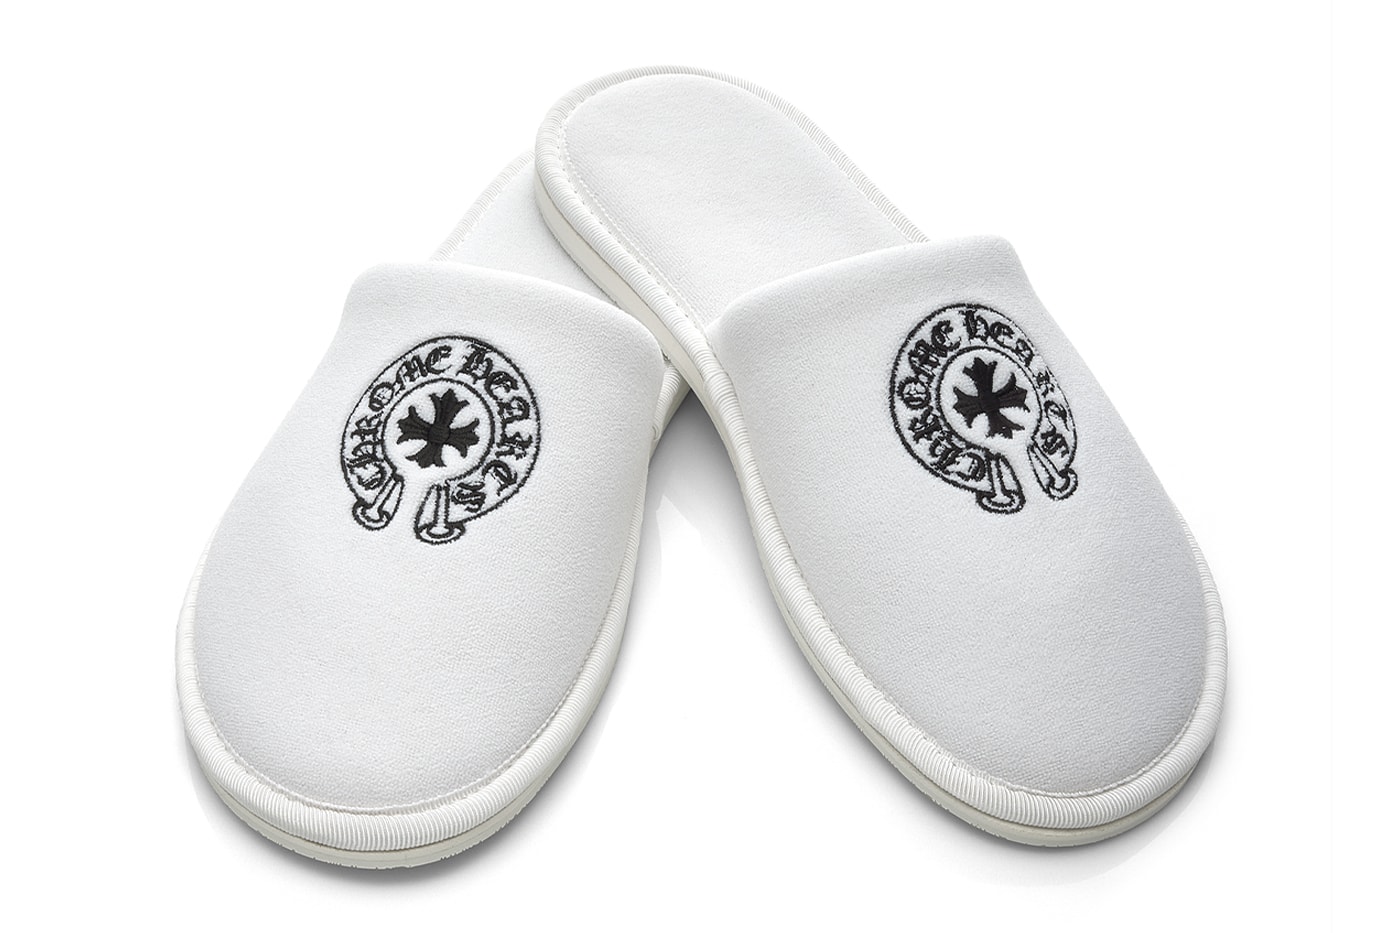 Chrome Hearts 475 USD Hotel Slippers Release Information details date footwear sandals